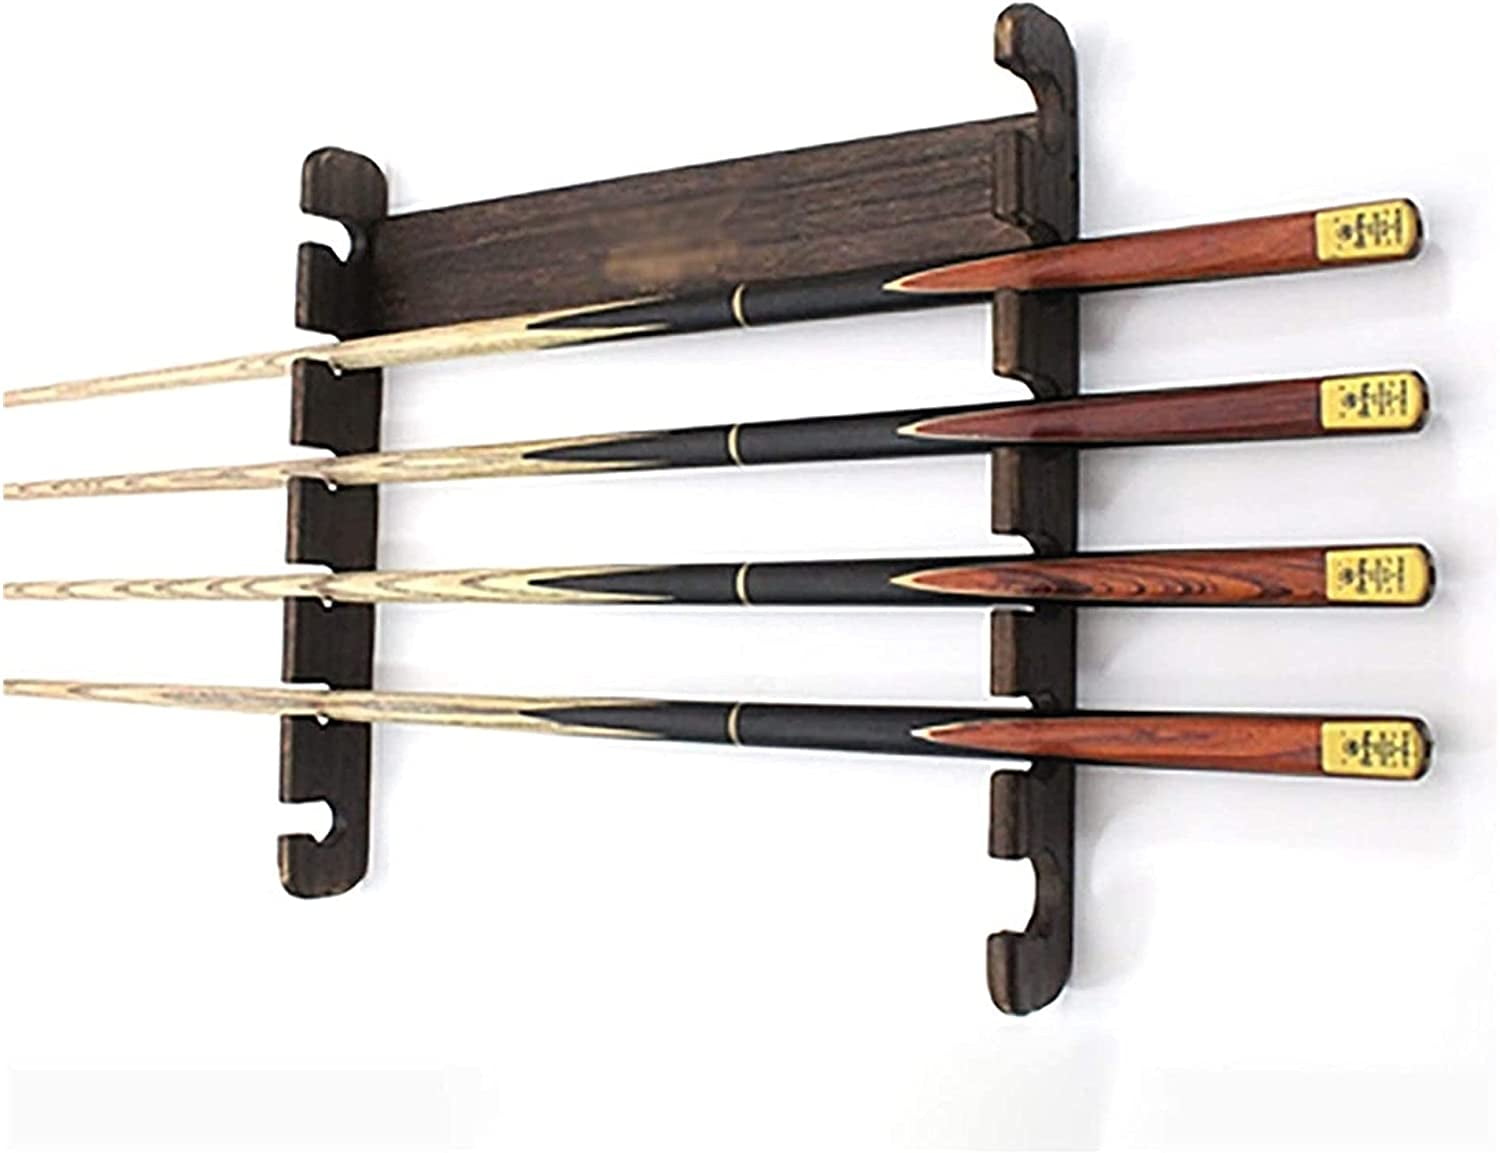 1 Set Wooden Pool Cue Rack Wall Mounted Hanging 6 Cue Sticks Holder Stand Kit 